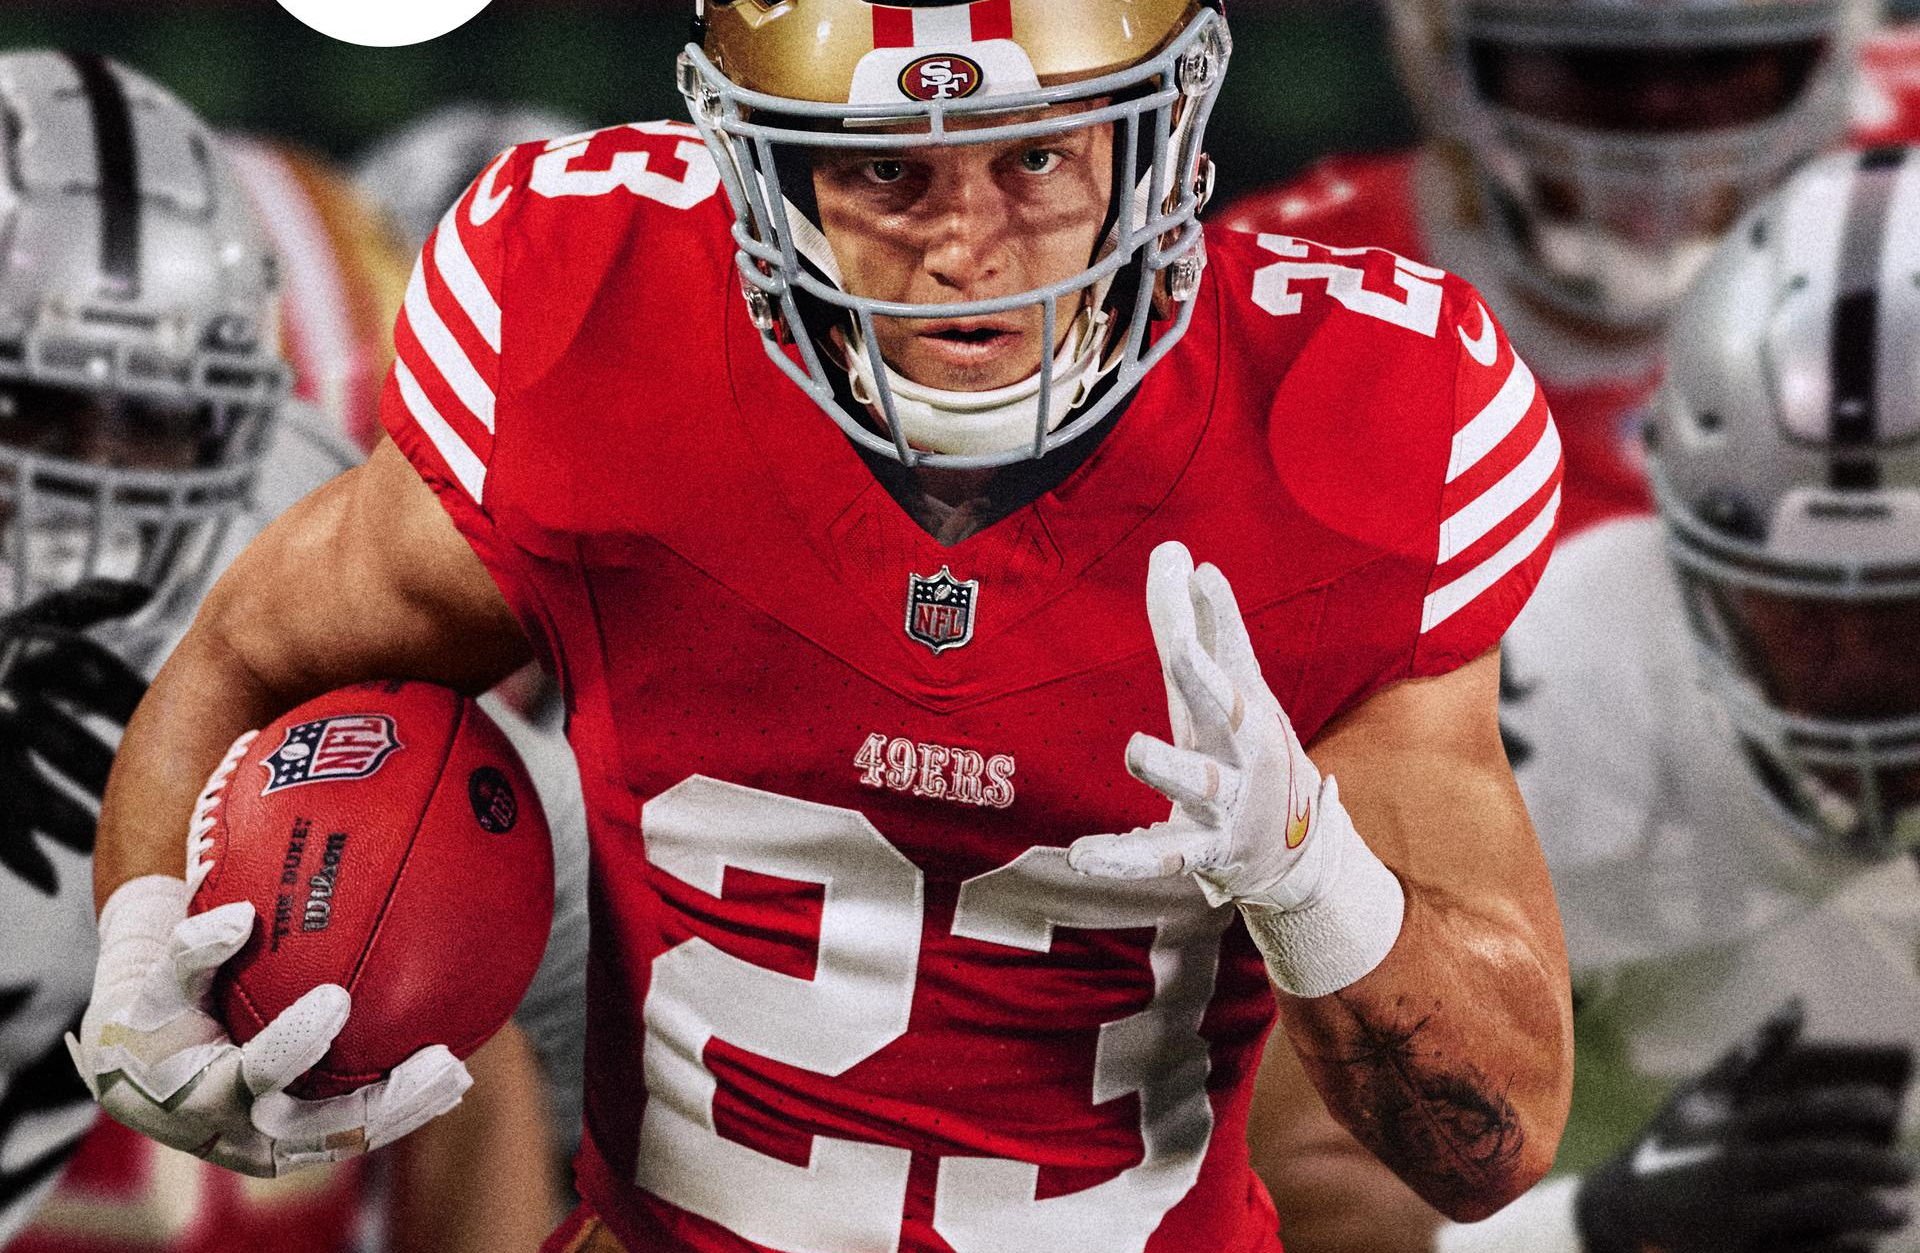 Madden NFL 25’s cover star is 49ers all-pro Christian McCaffrey